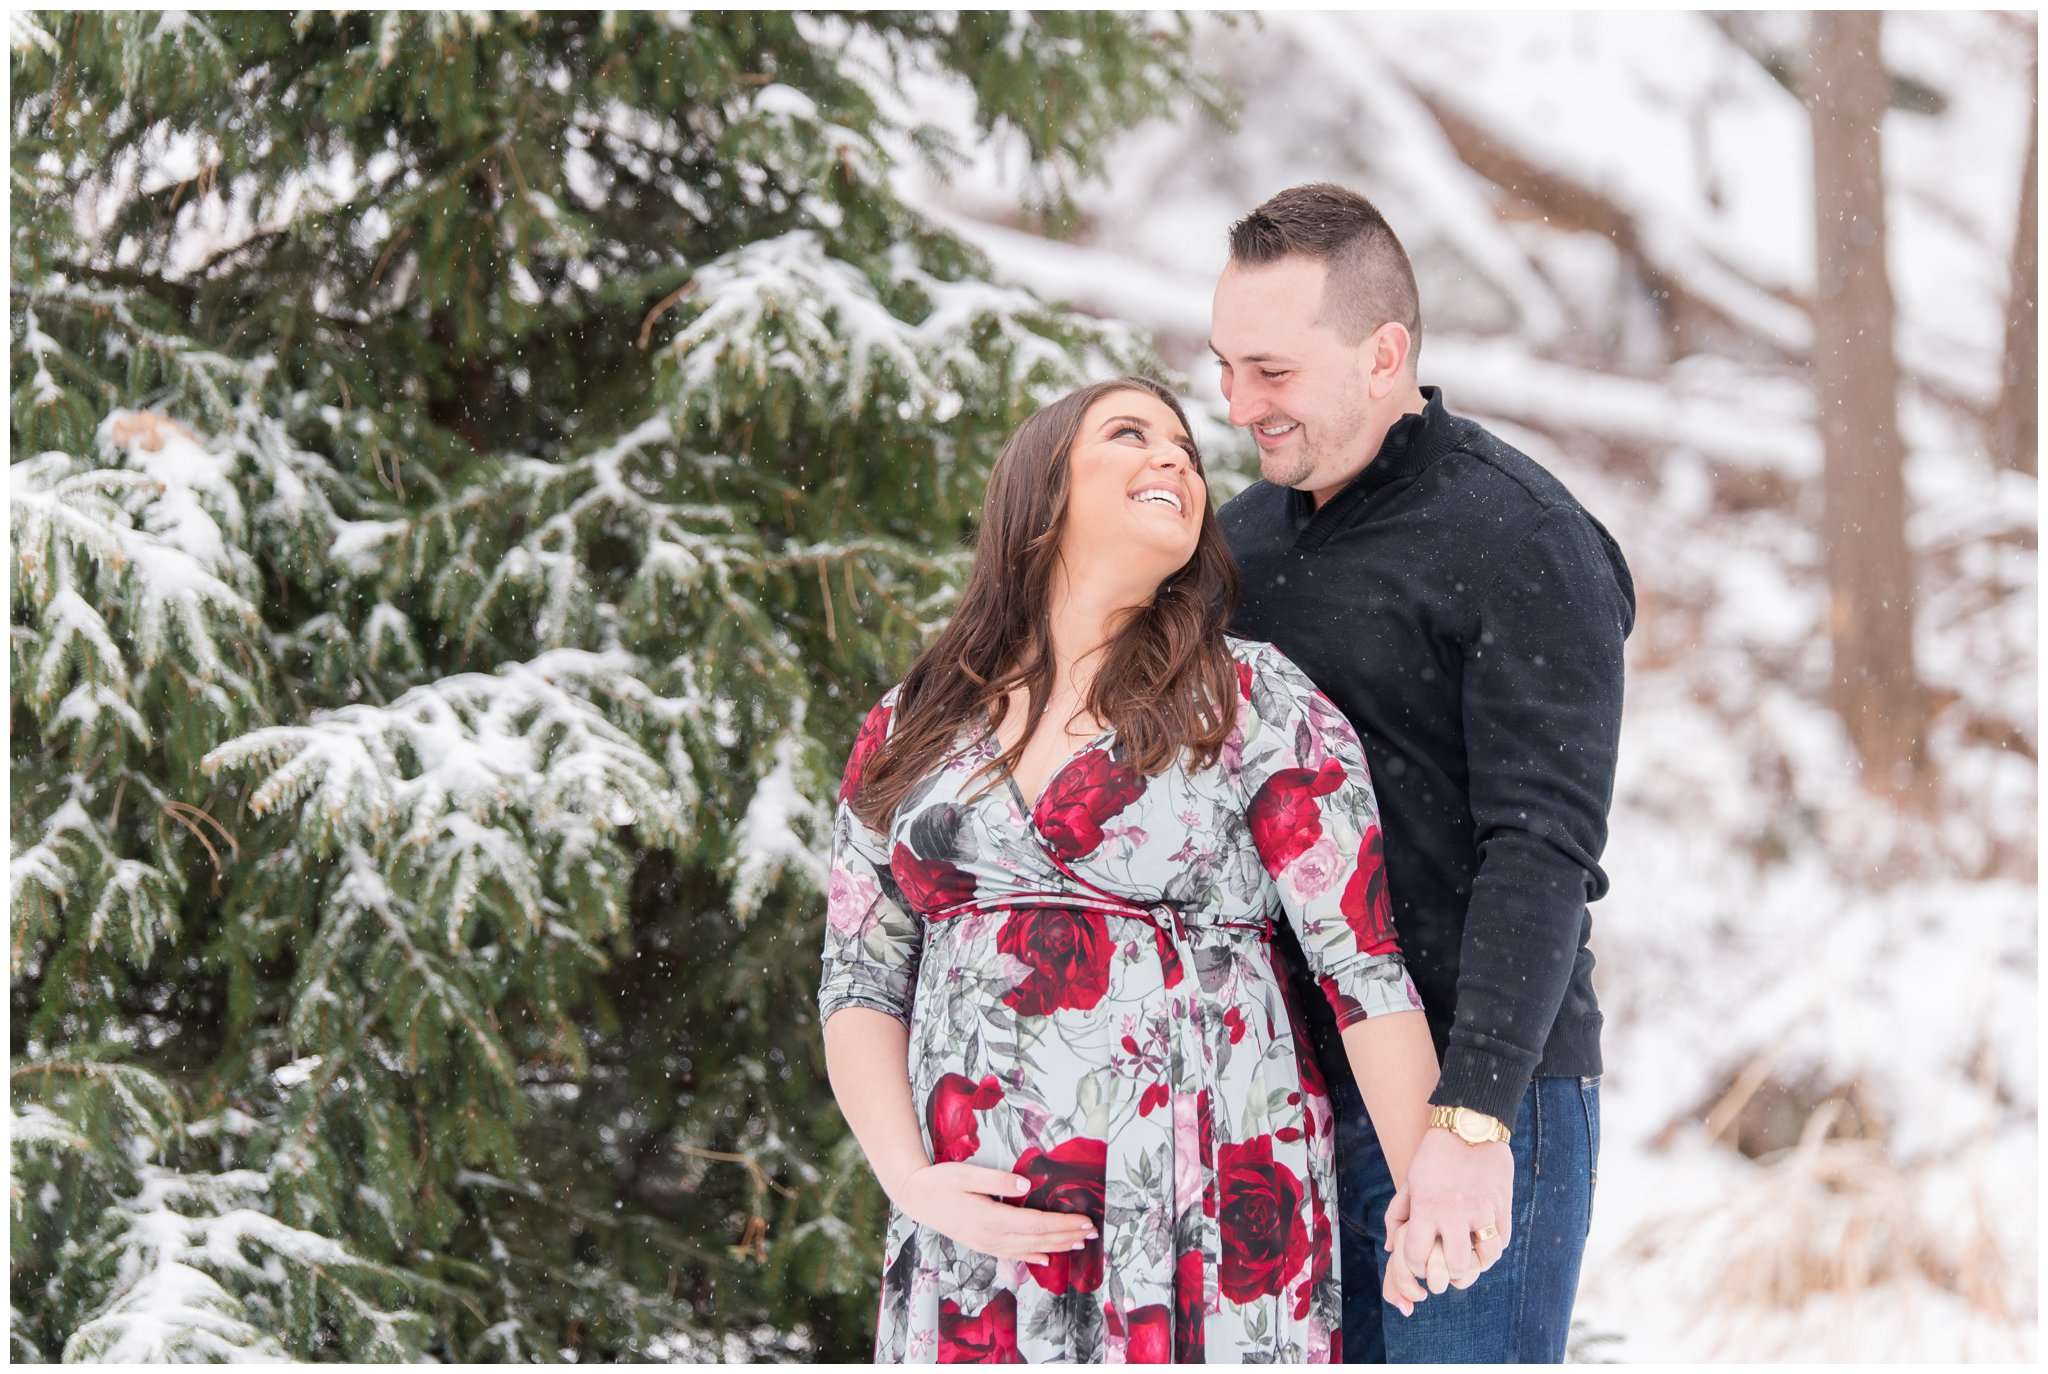 maternity photography sussex county nj winter